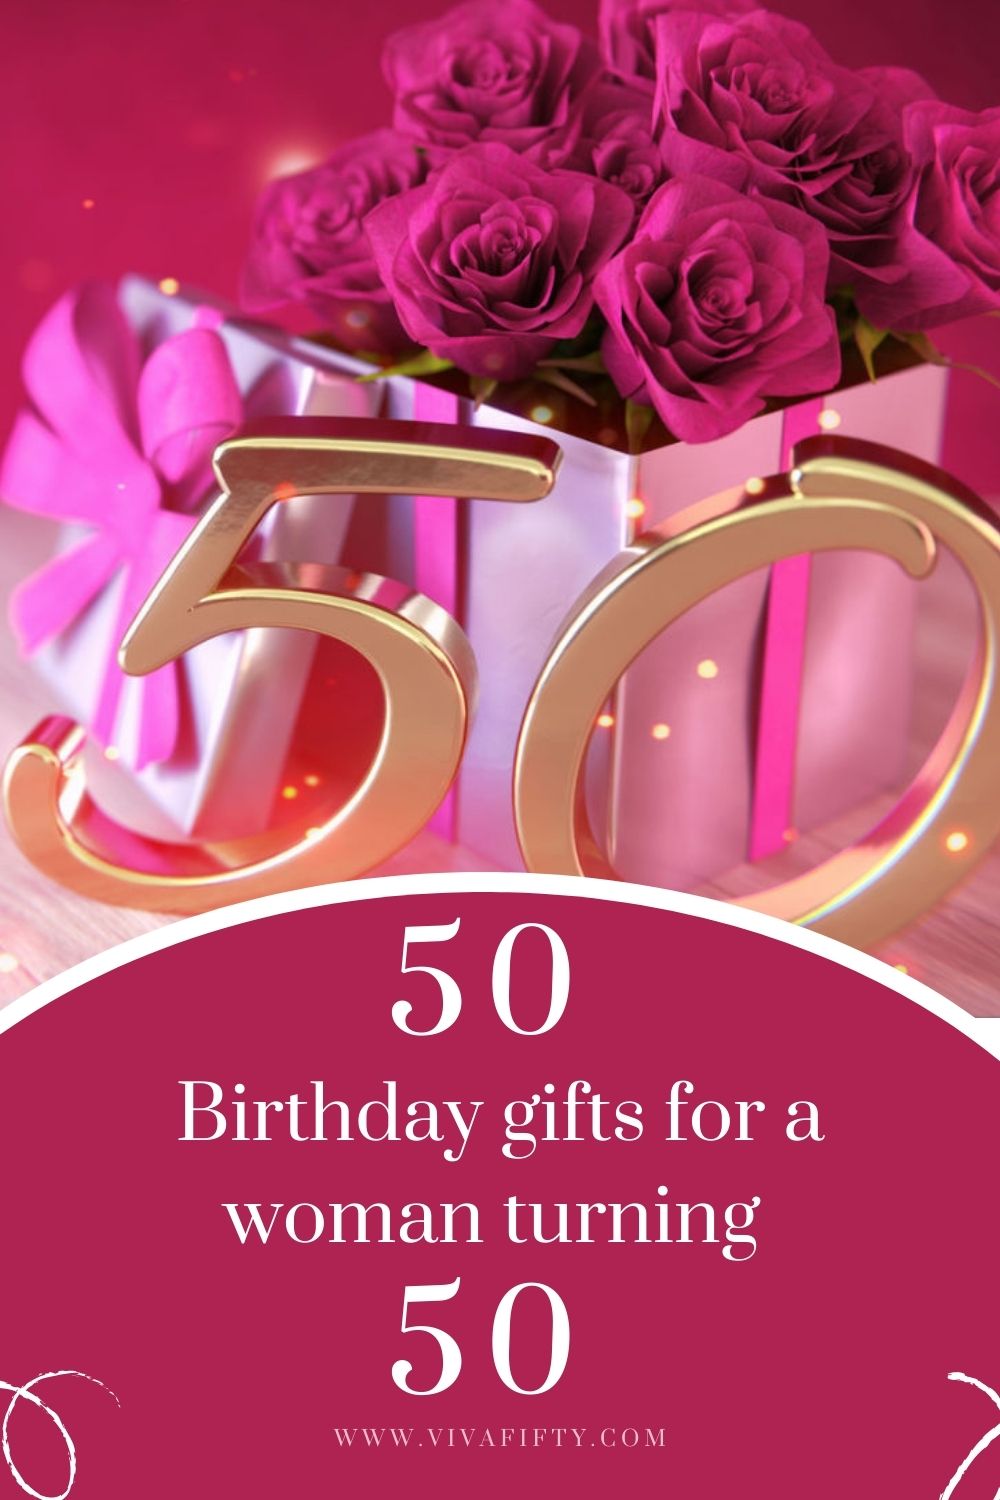 50th birthday gift ideas for her 50th birthday gifts for women gift ideas  for sister for wife mom best friend female aunt coworker boss | MakerPlace  by Michaels